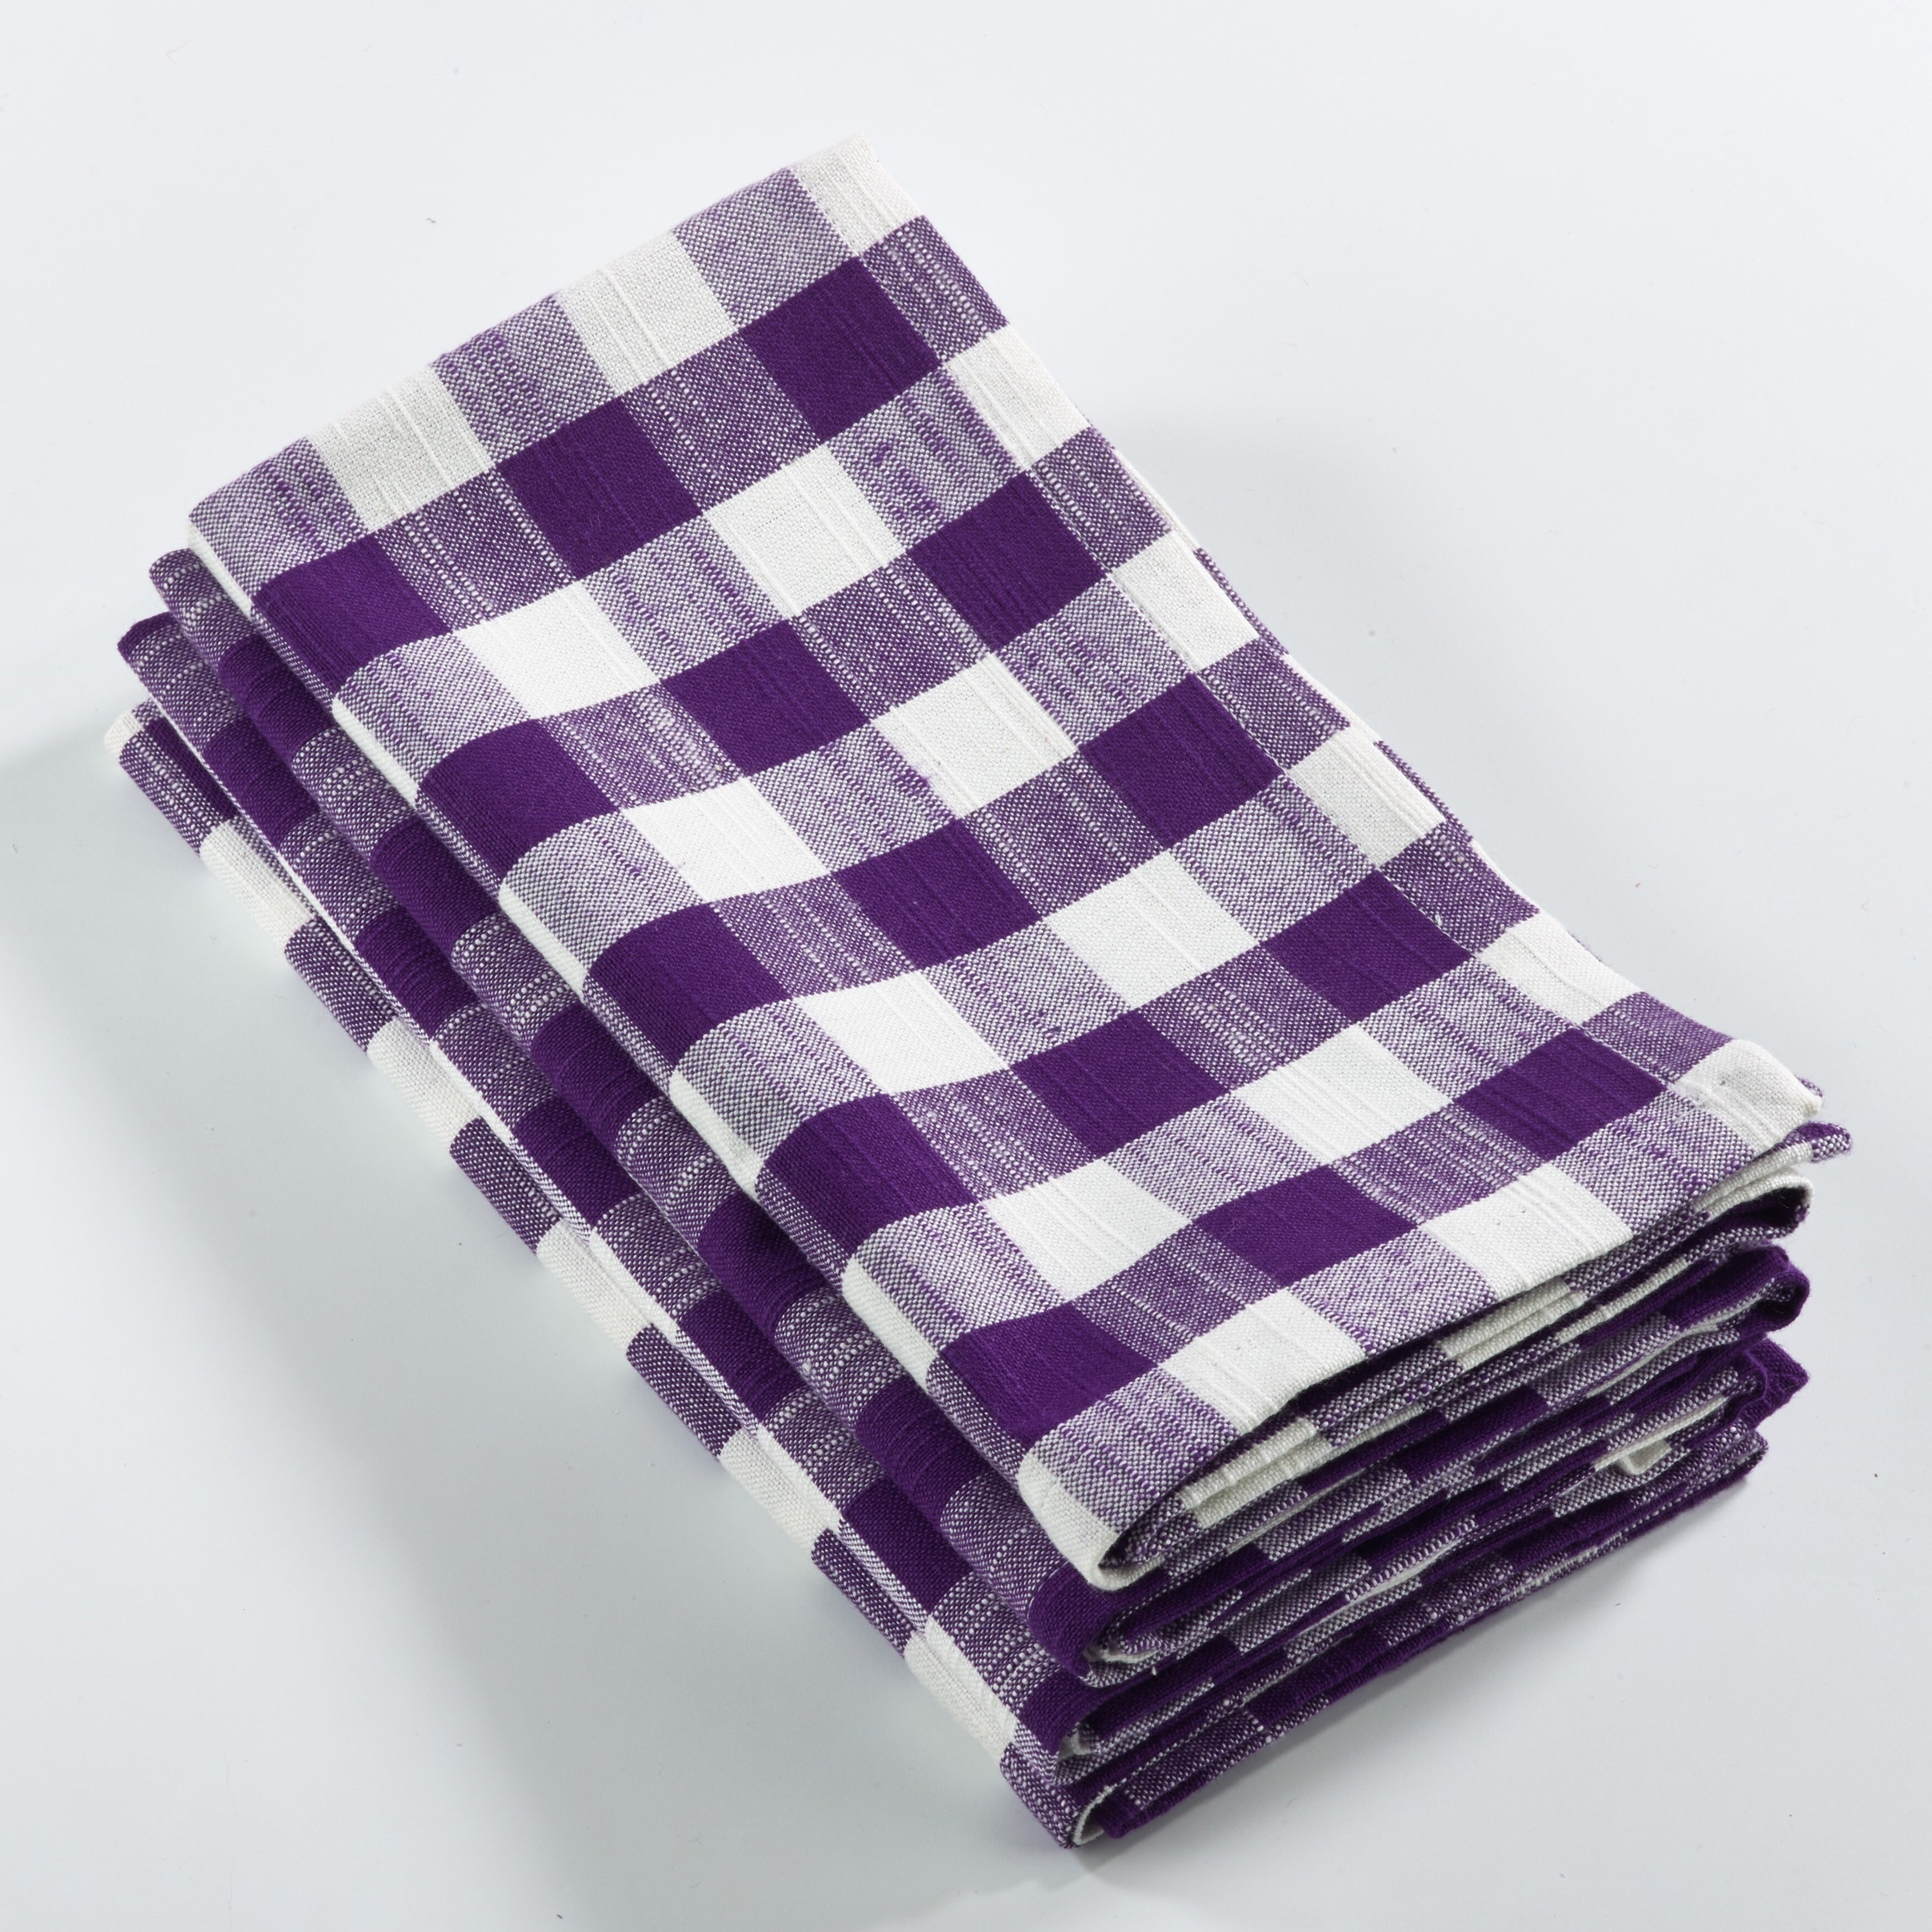 https://ak1.ostkcdn.com/images/products/12215421/Table-Napkins-With-Gingham-Design-Set-of-4-895421a6-ad9d-4de2-ae4b-6af638f94006.jpg